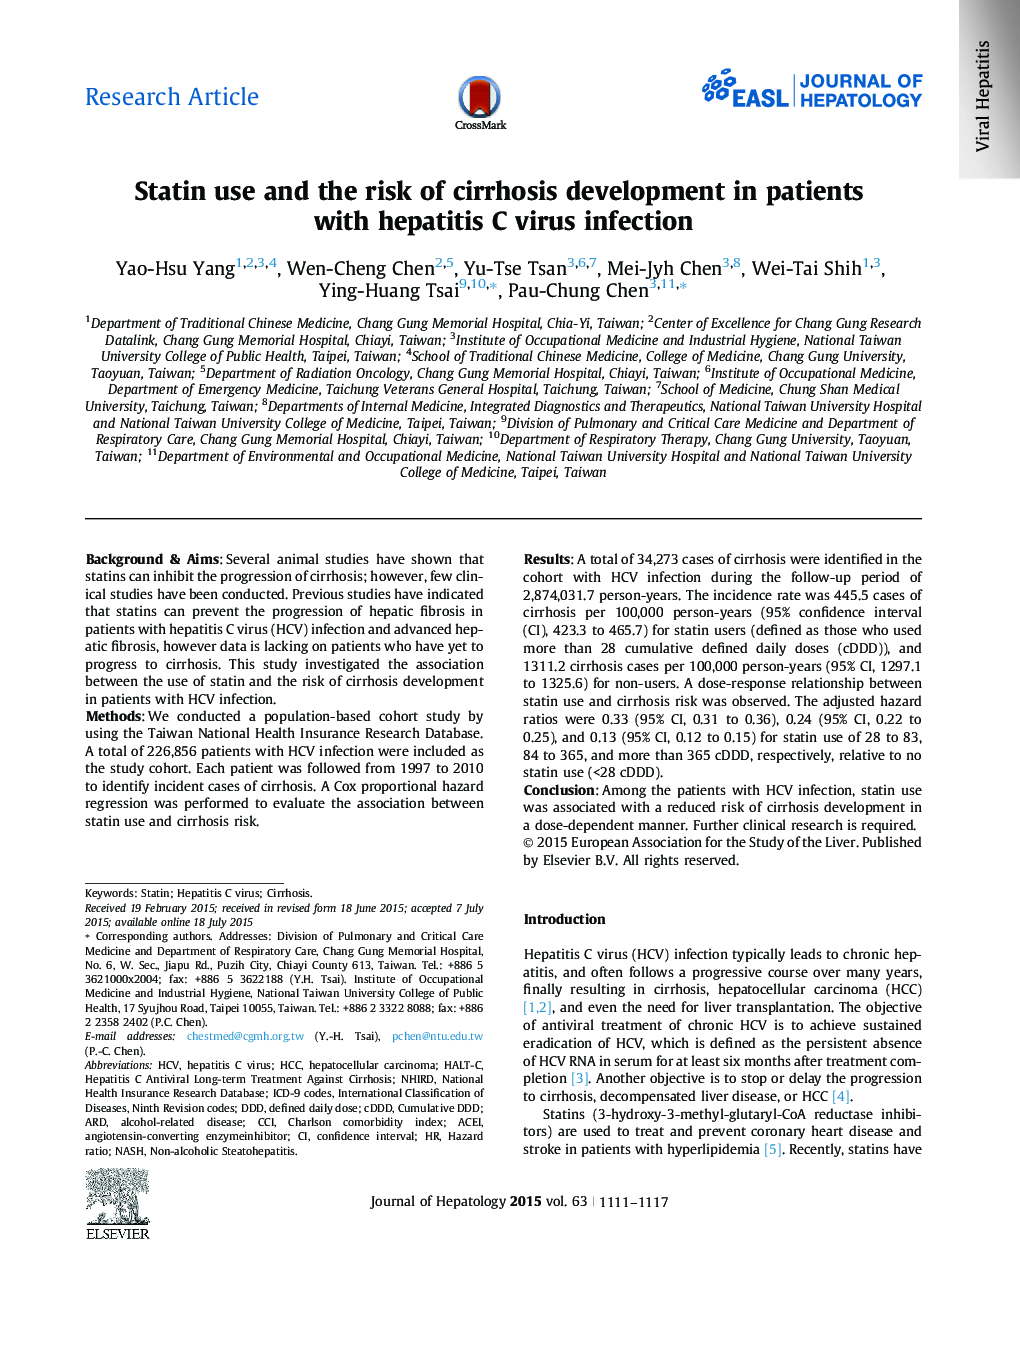 Research ArticleStatin use and the risk of cirrhosis development in patients with hepatitis C virus infection